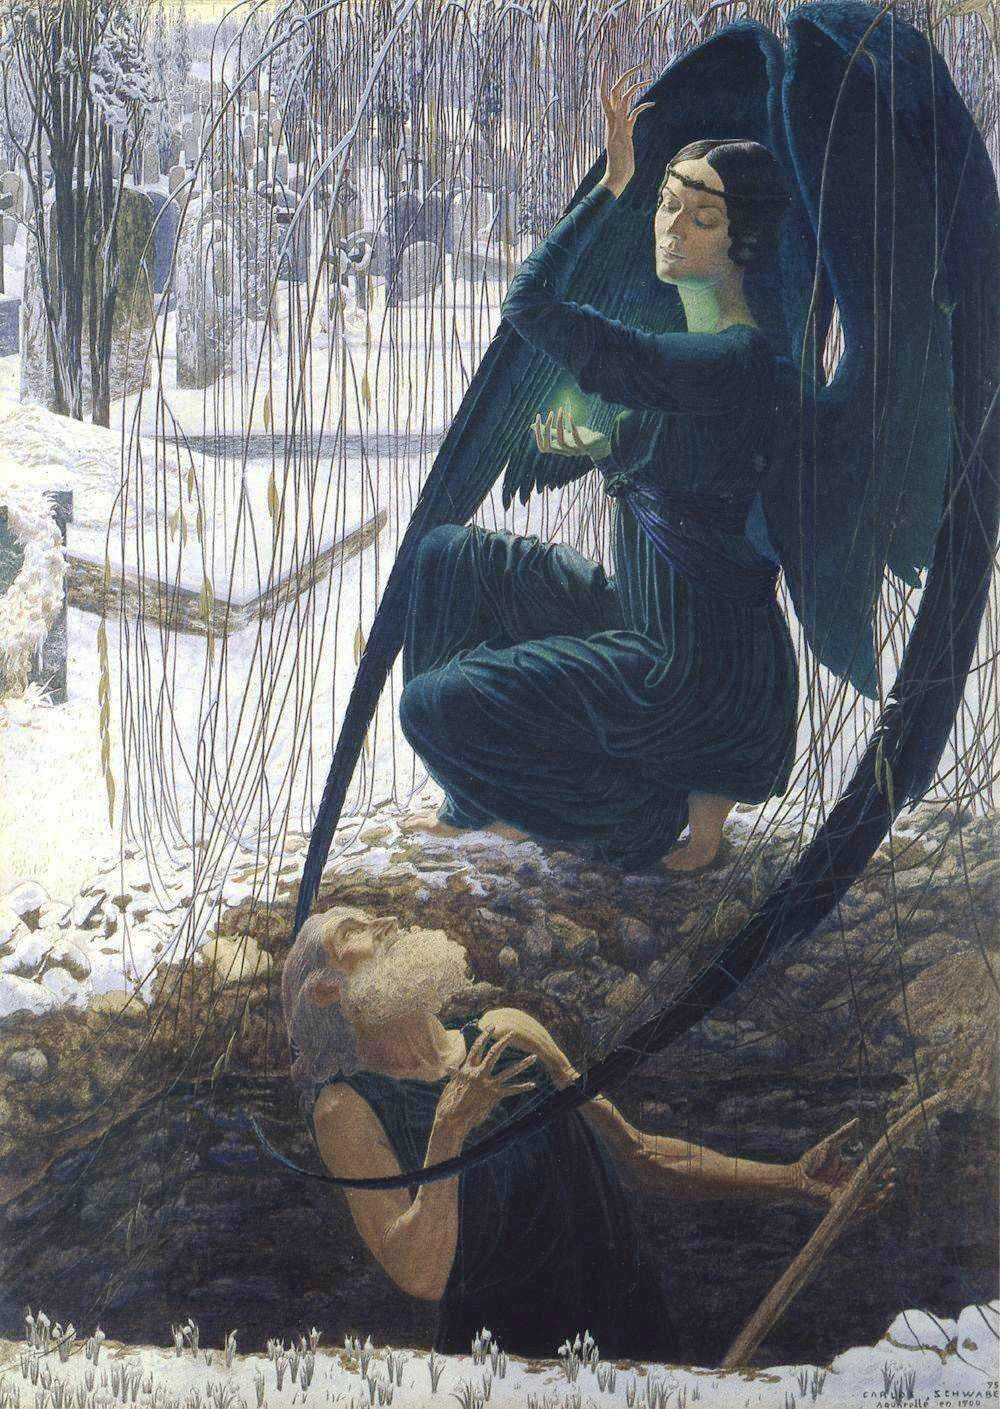 Carlos Schwabe, Death and the Gravedigger, c. 1895, watercolor and gouache on paper, 75 x 55.5 cm (Musée d’Orsay, Paris)